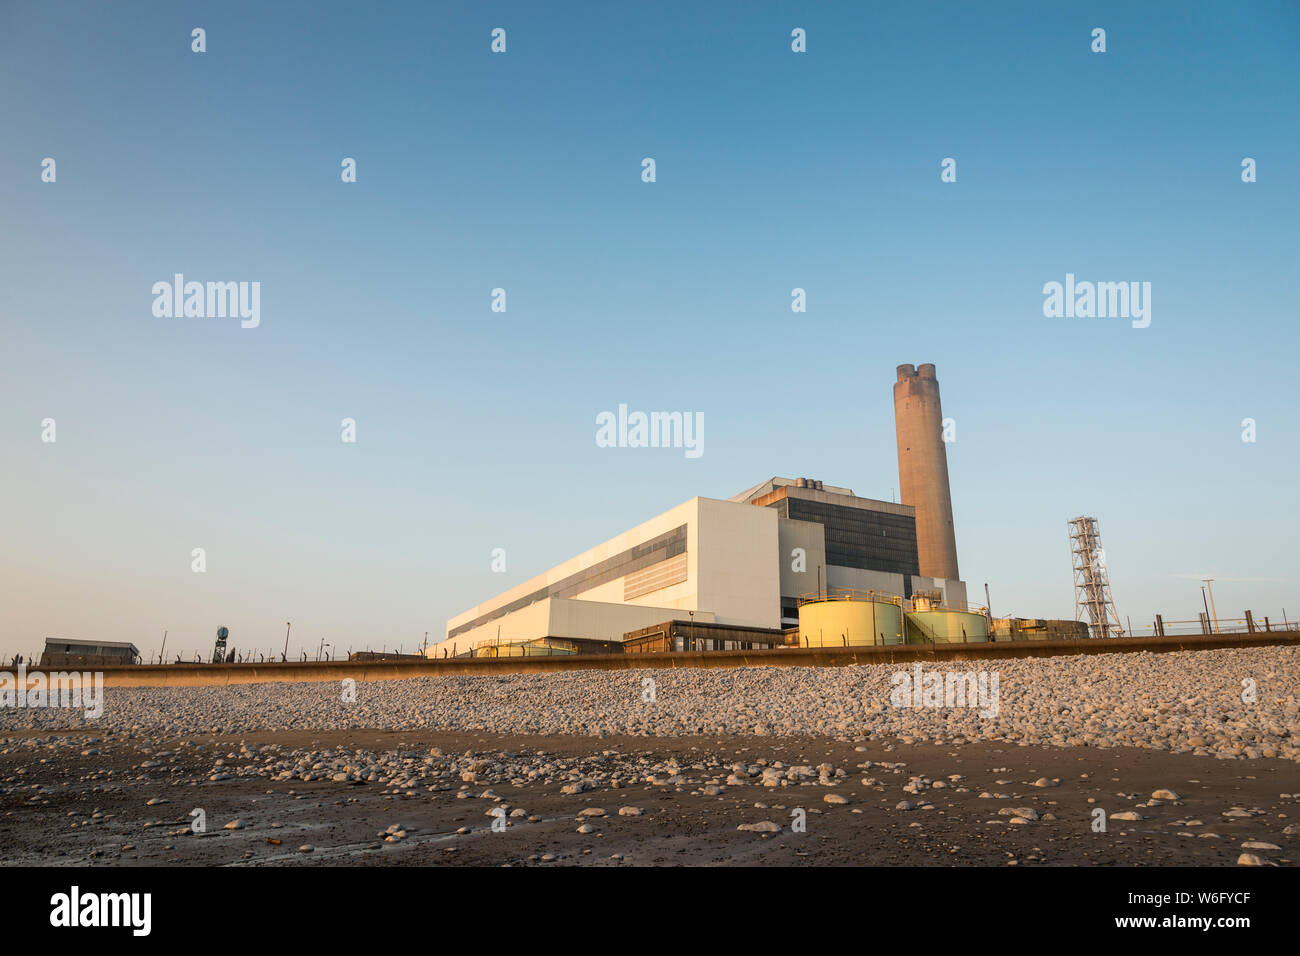 A view of Aberthaw coal fired power station, from the adjacent beach, when it is bathed in pale evening sunlight under a cloudless blue sky. Stock Photo